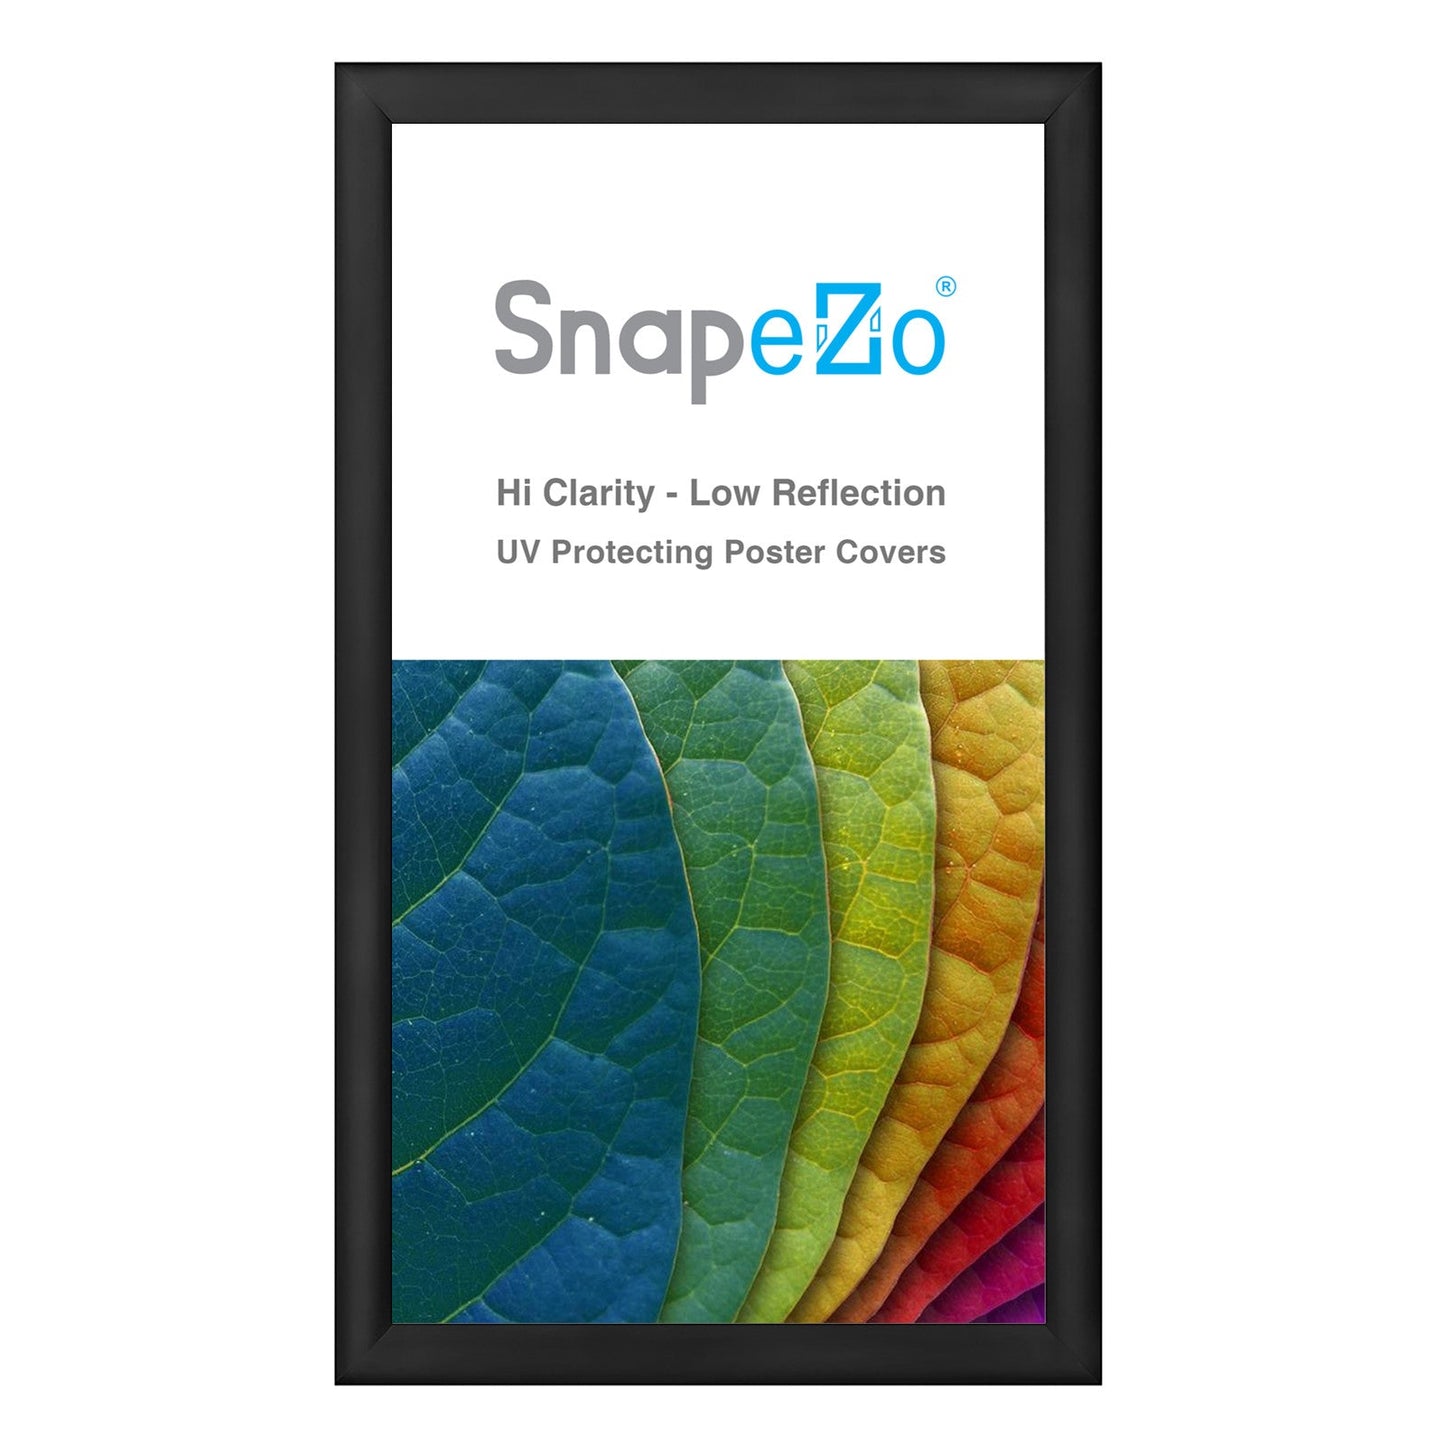 Load image into Gallery viewer, 20x35 Black SnapeZo® Snap Frame - 1.2&amp;quot; Profile
